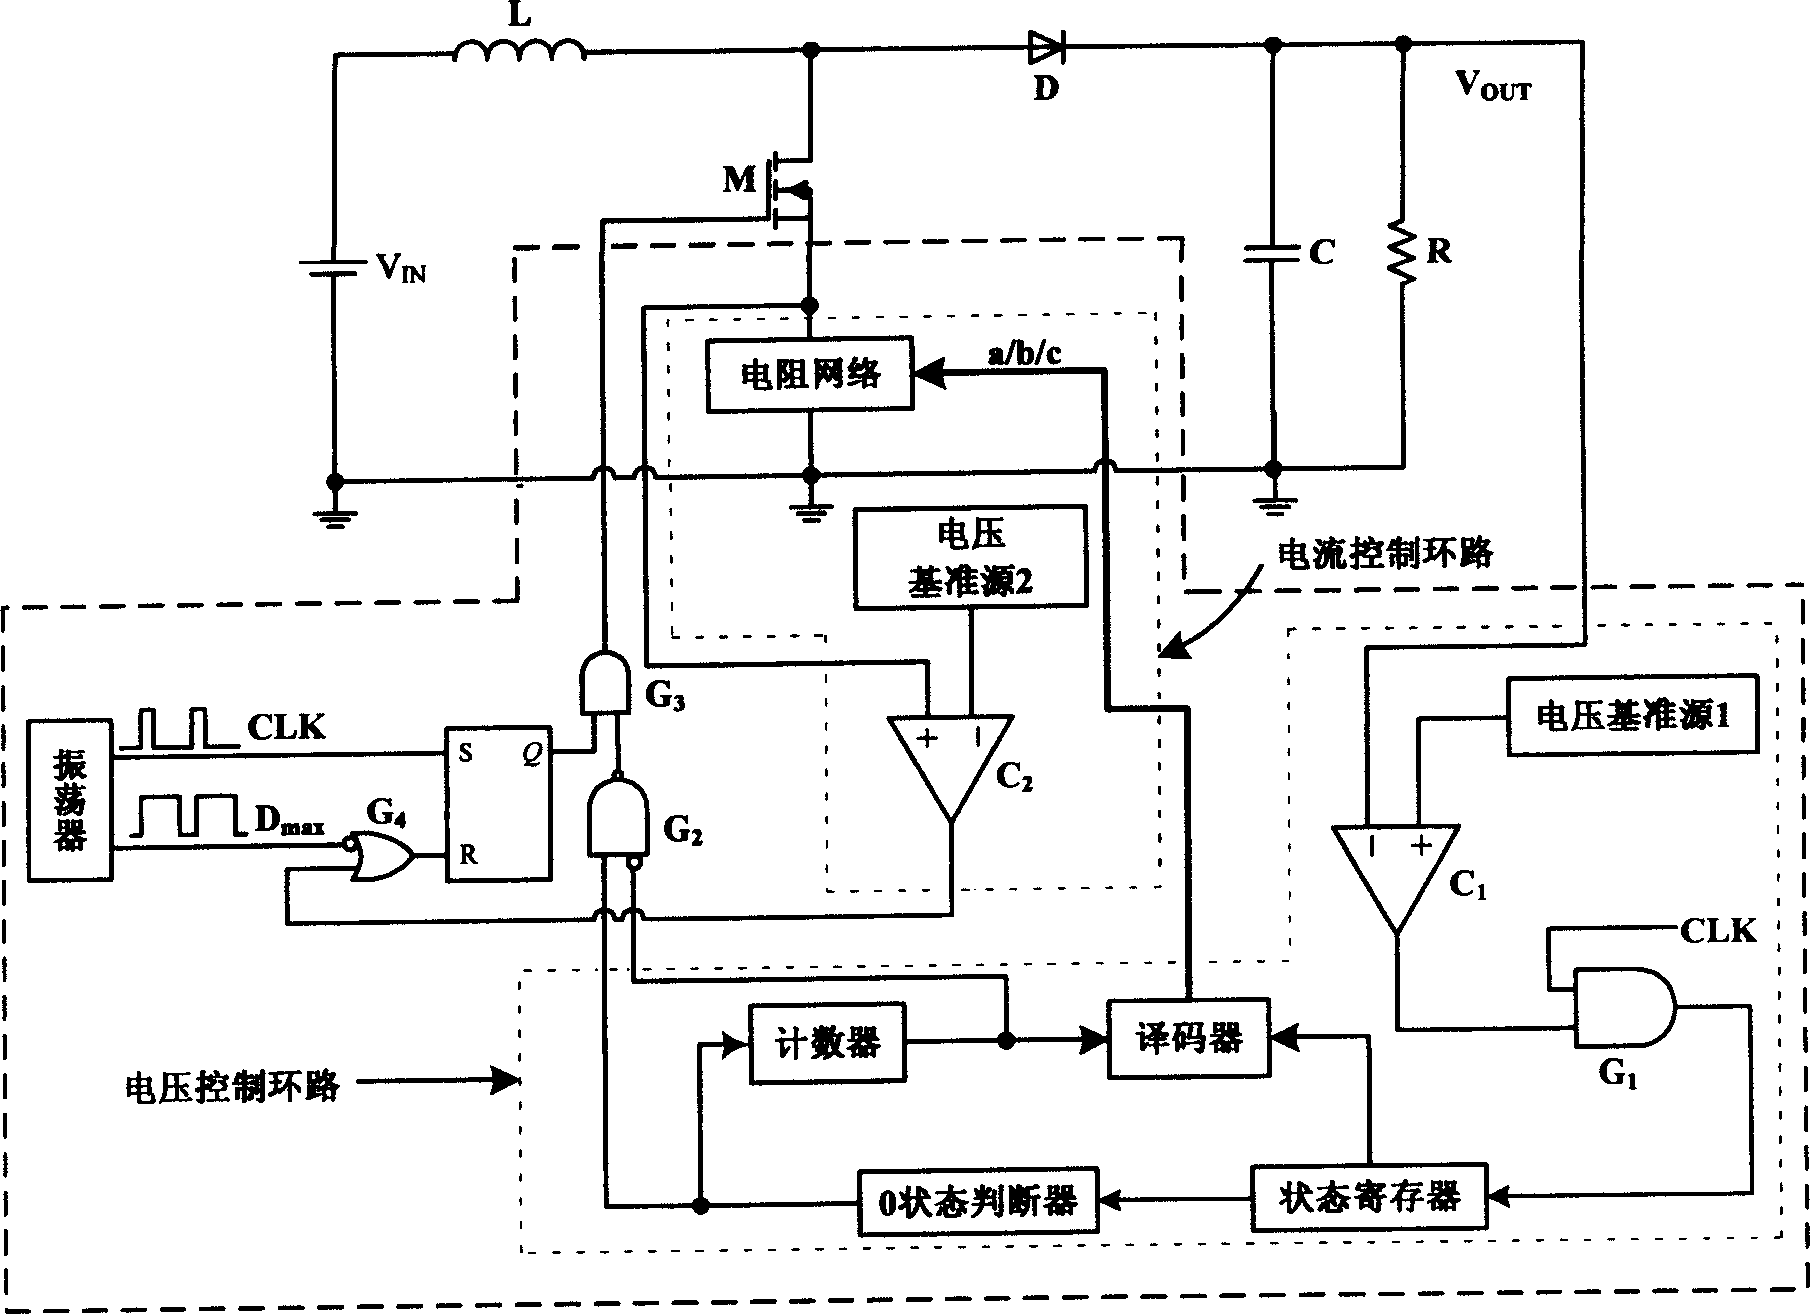 Optimized pulse over-cycle modulation switch stabilized voltage power supply controller